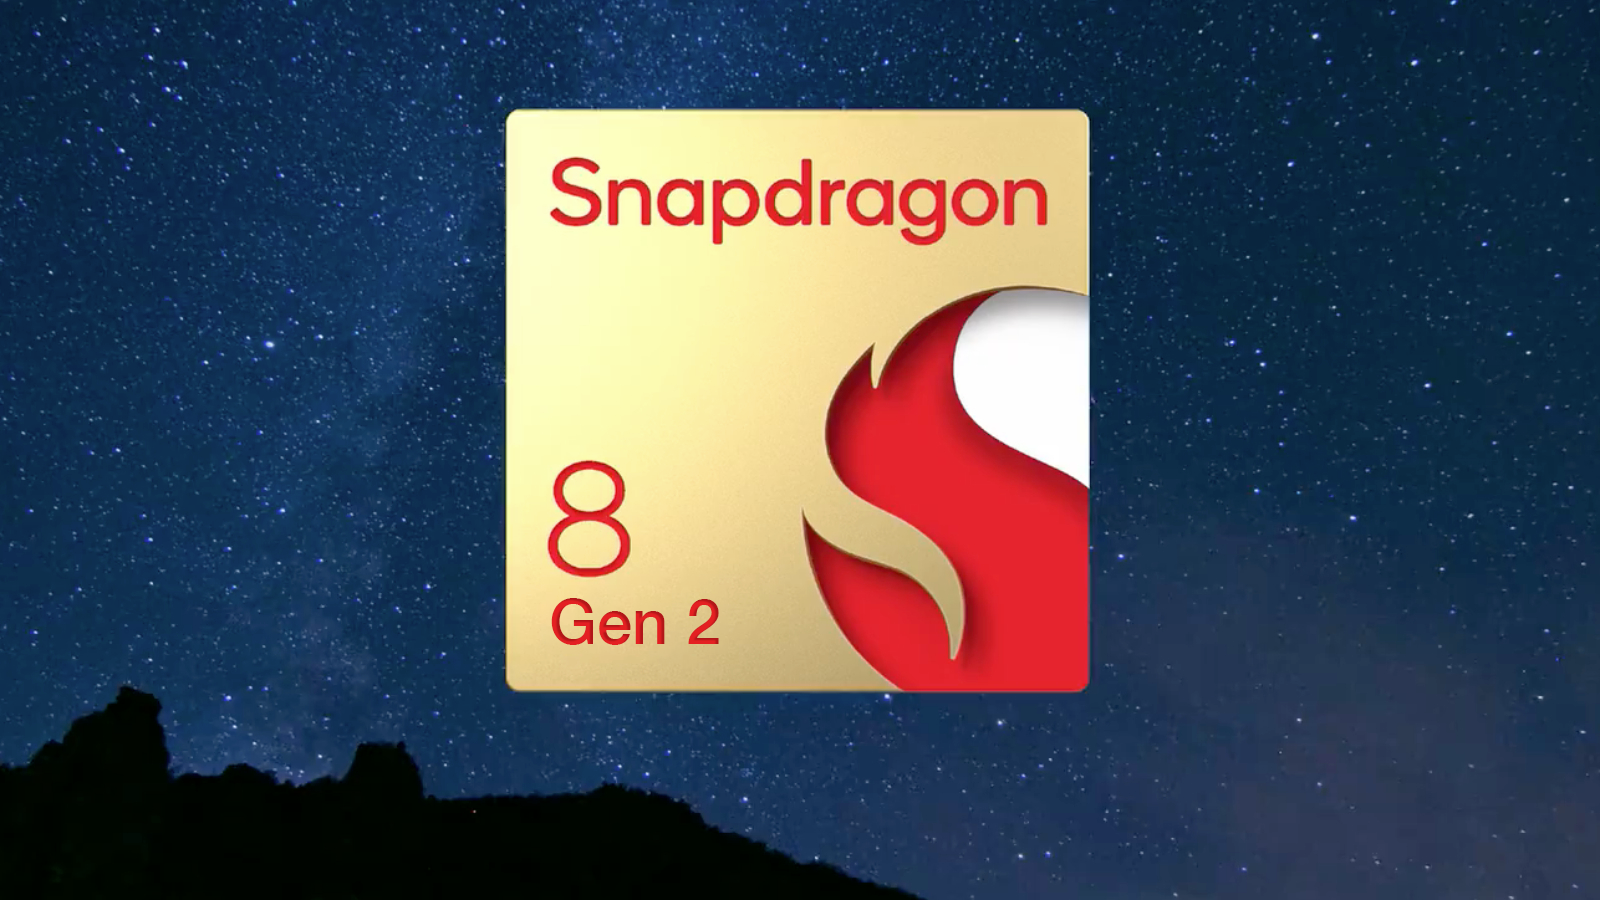 Phones equipped with Snapdragon 8 generation 2 will be released by mid-autumn